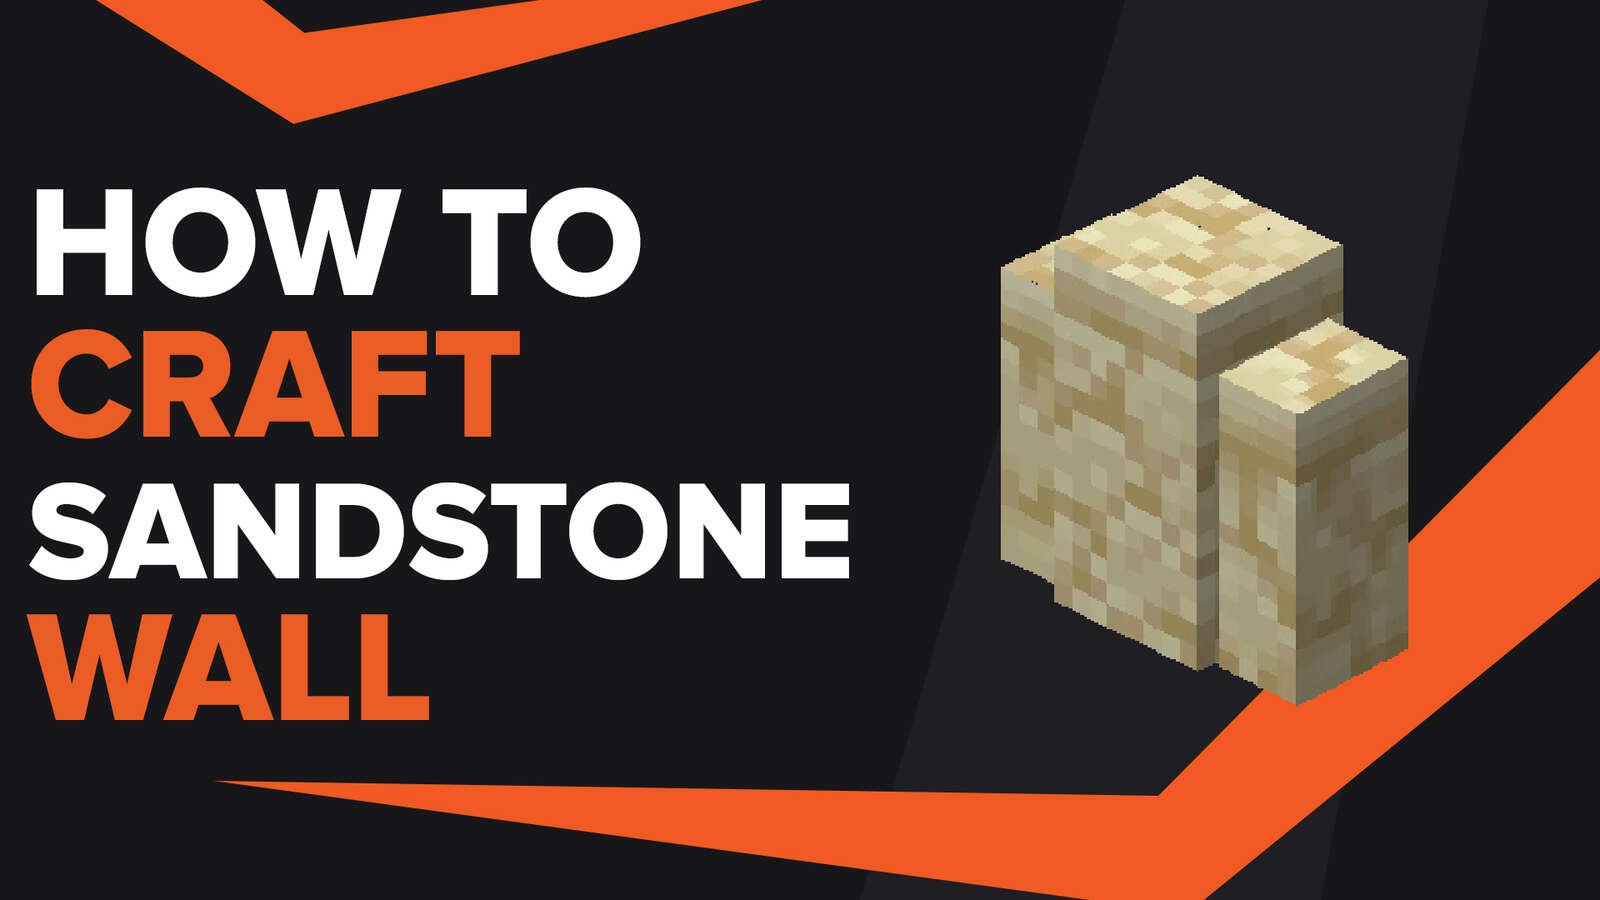 How To Make Sandstone Wall In Minecraft